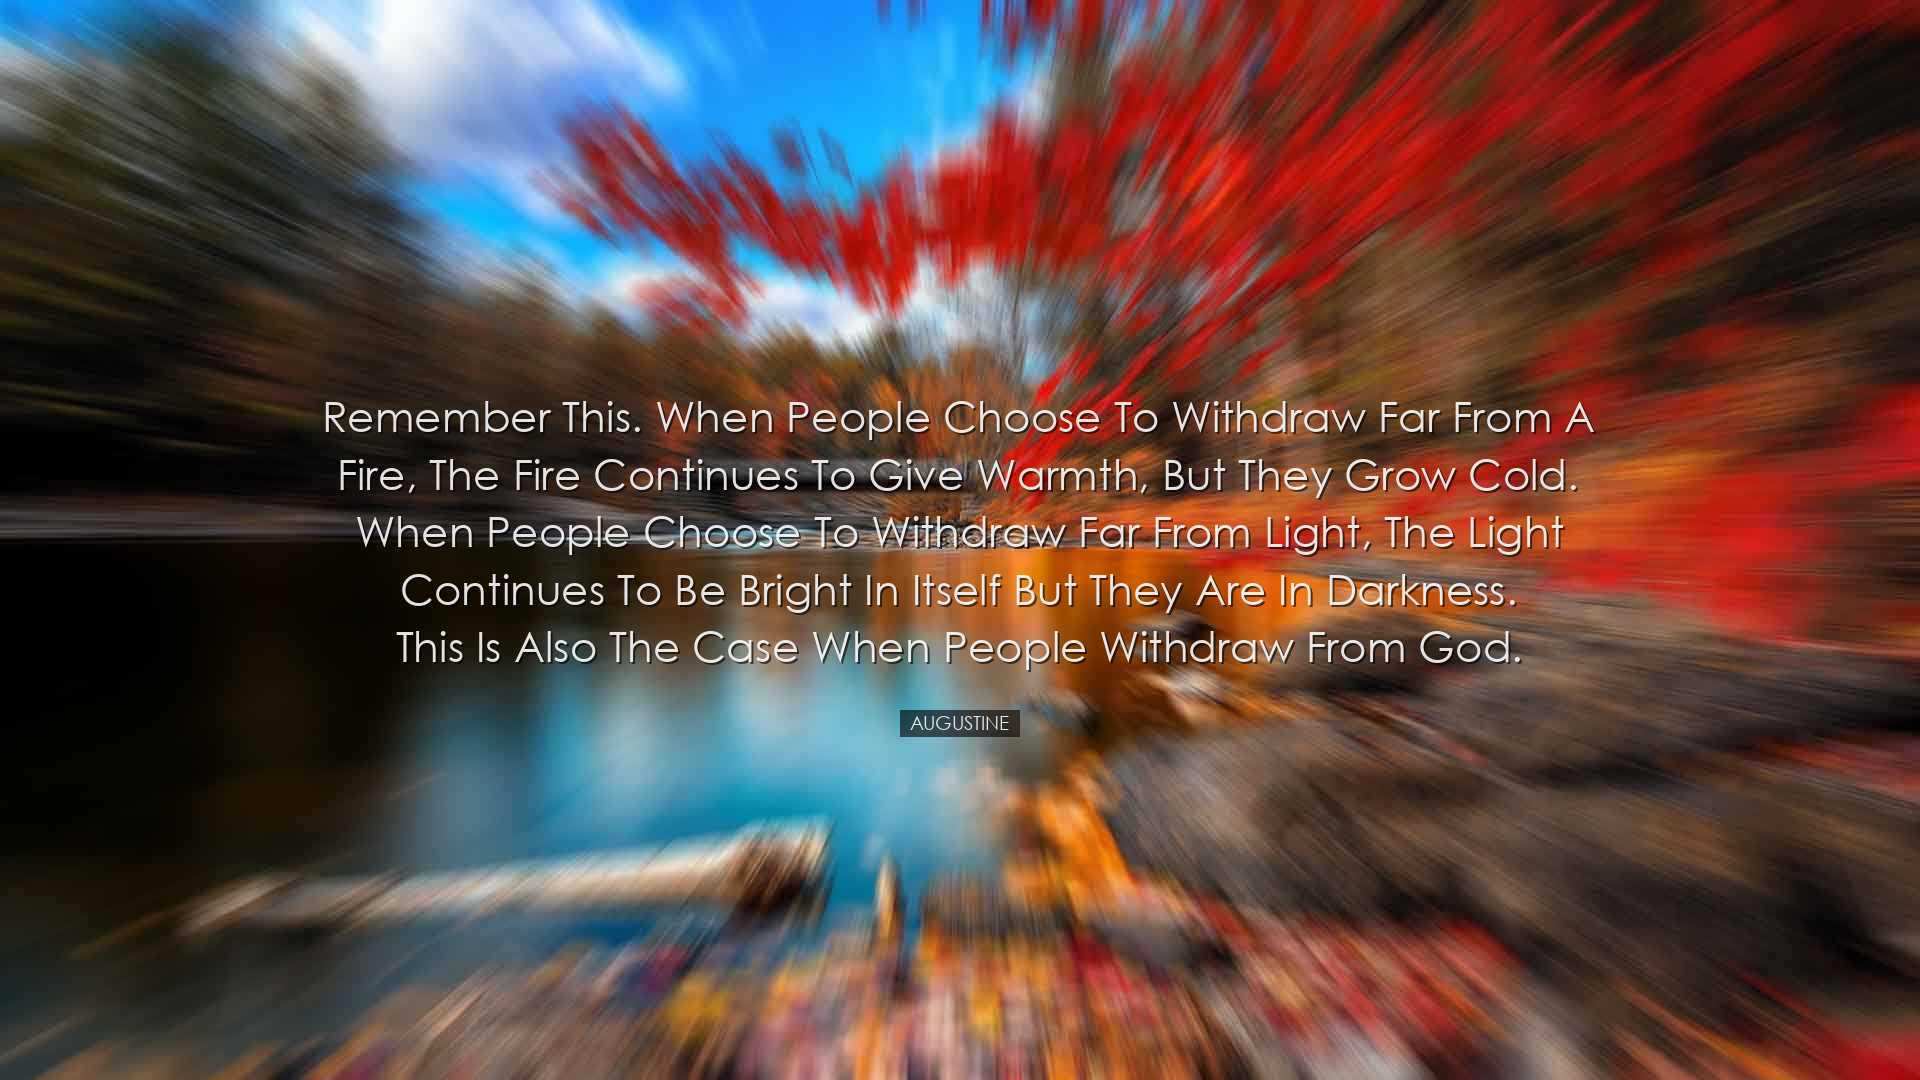 Remember this. When people choose to withdraw far from a fire, the